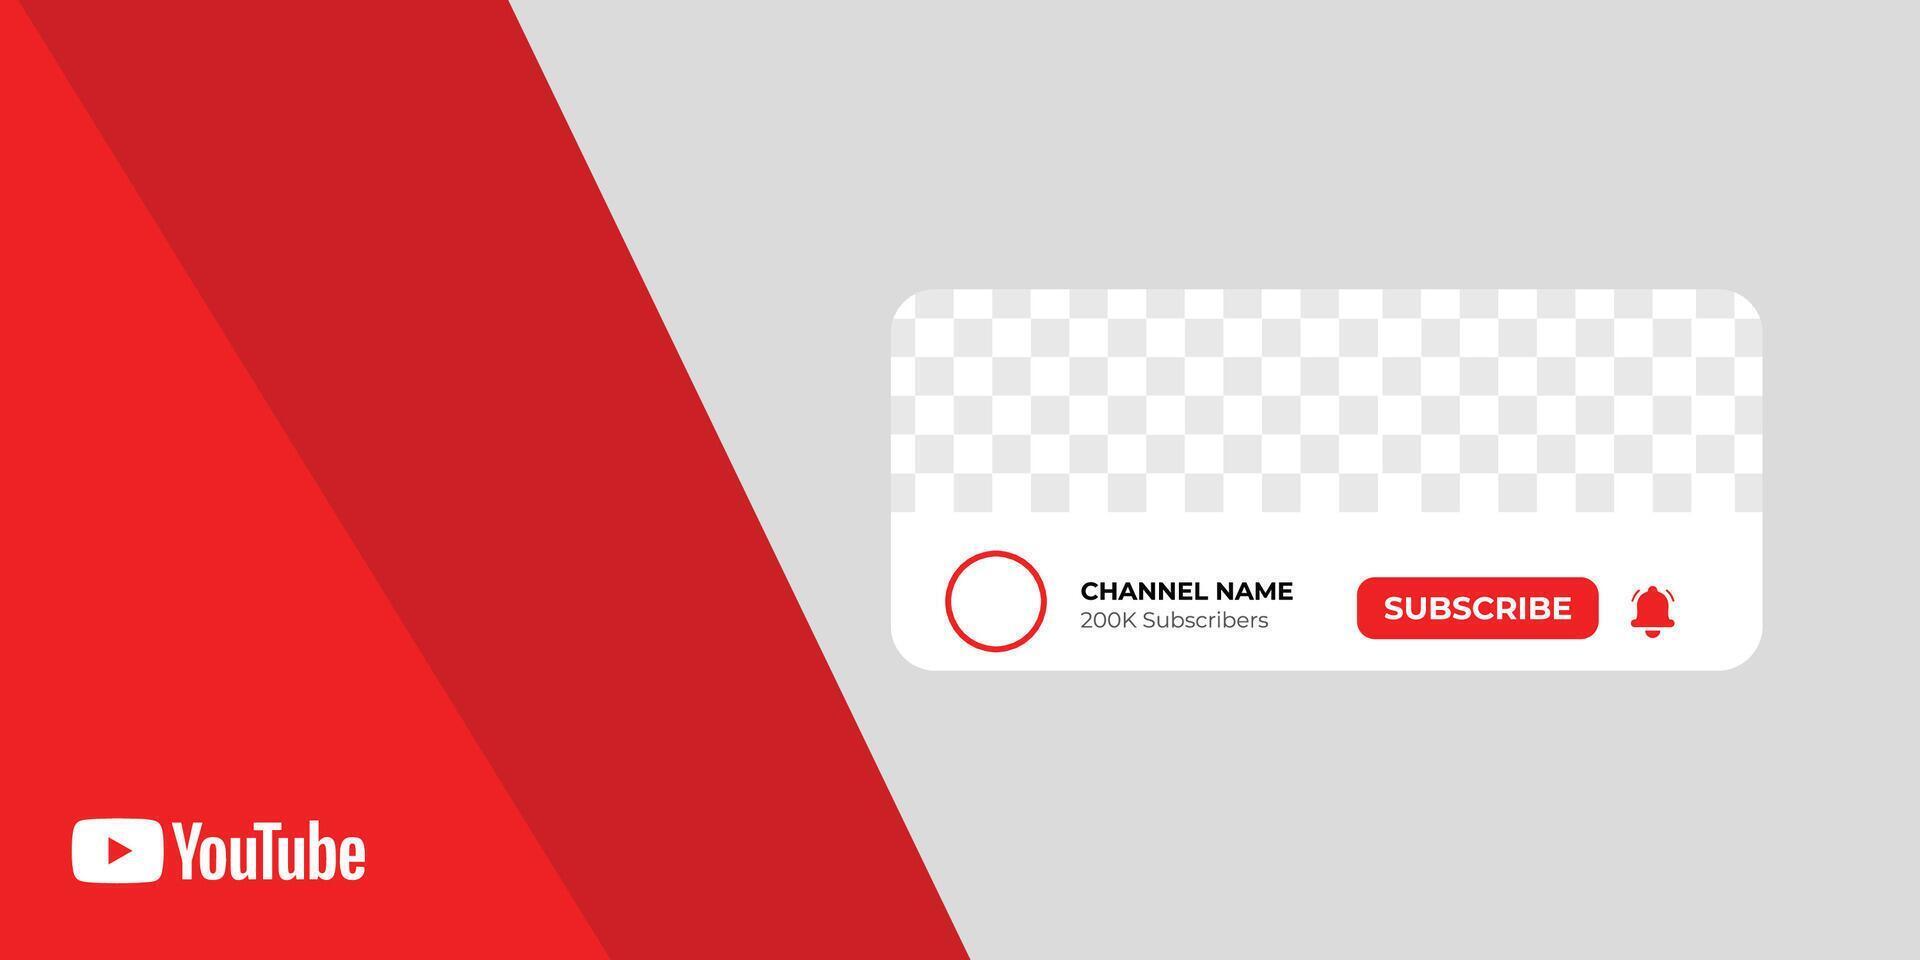 Youtube Profile Icon Interface. Subscribe Button. Channel Name. vector